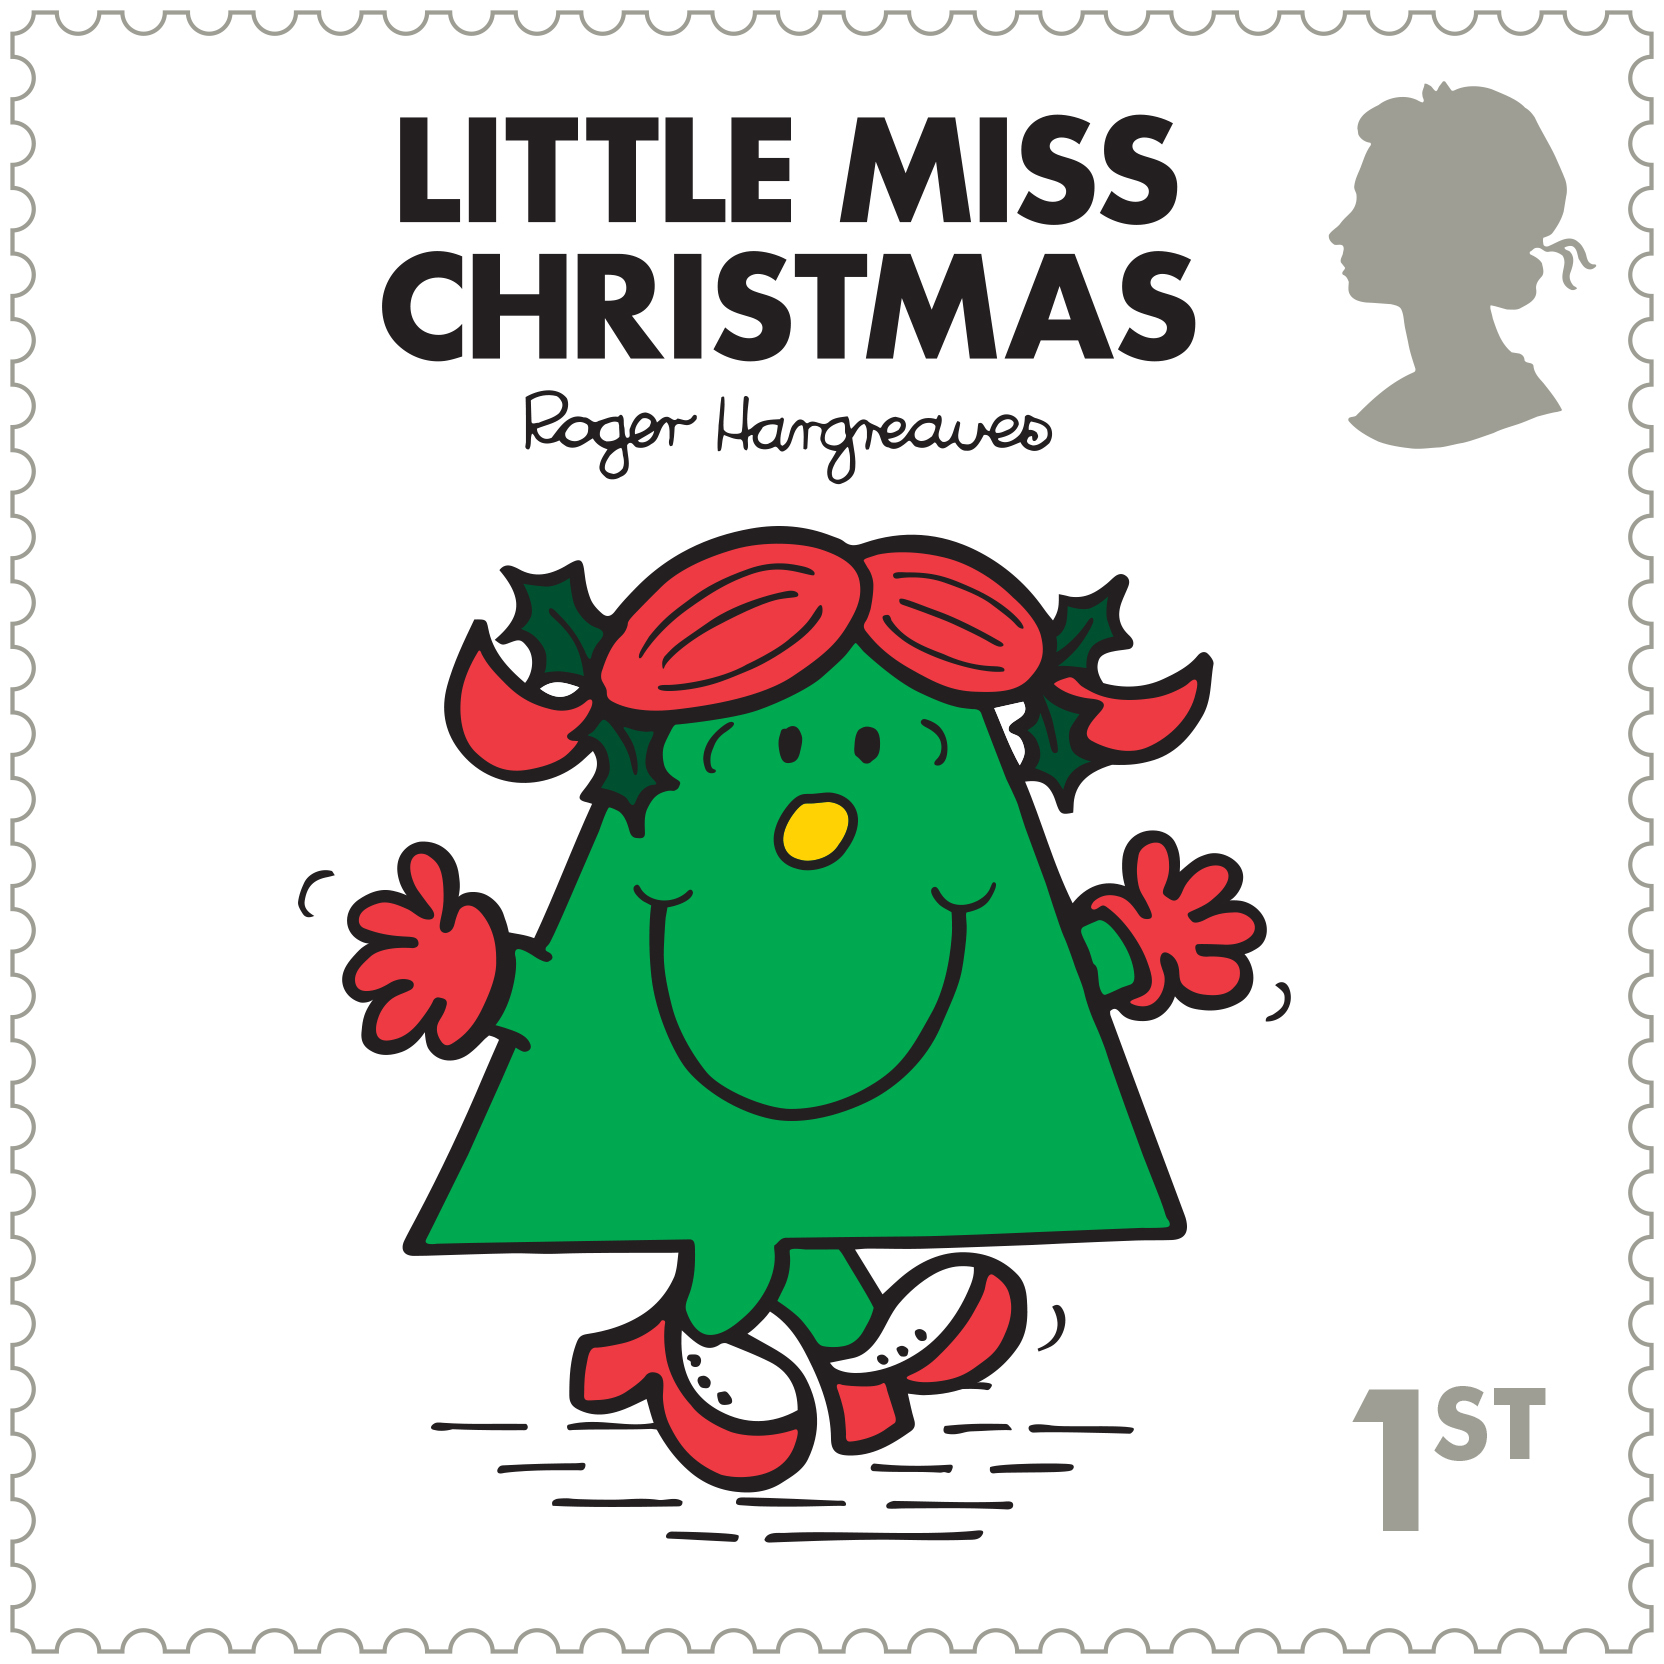 Mr Men and Little Miss stamps - Little Miss Christmas (Royal Mail/PA)